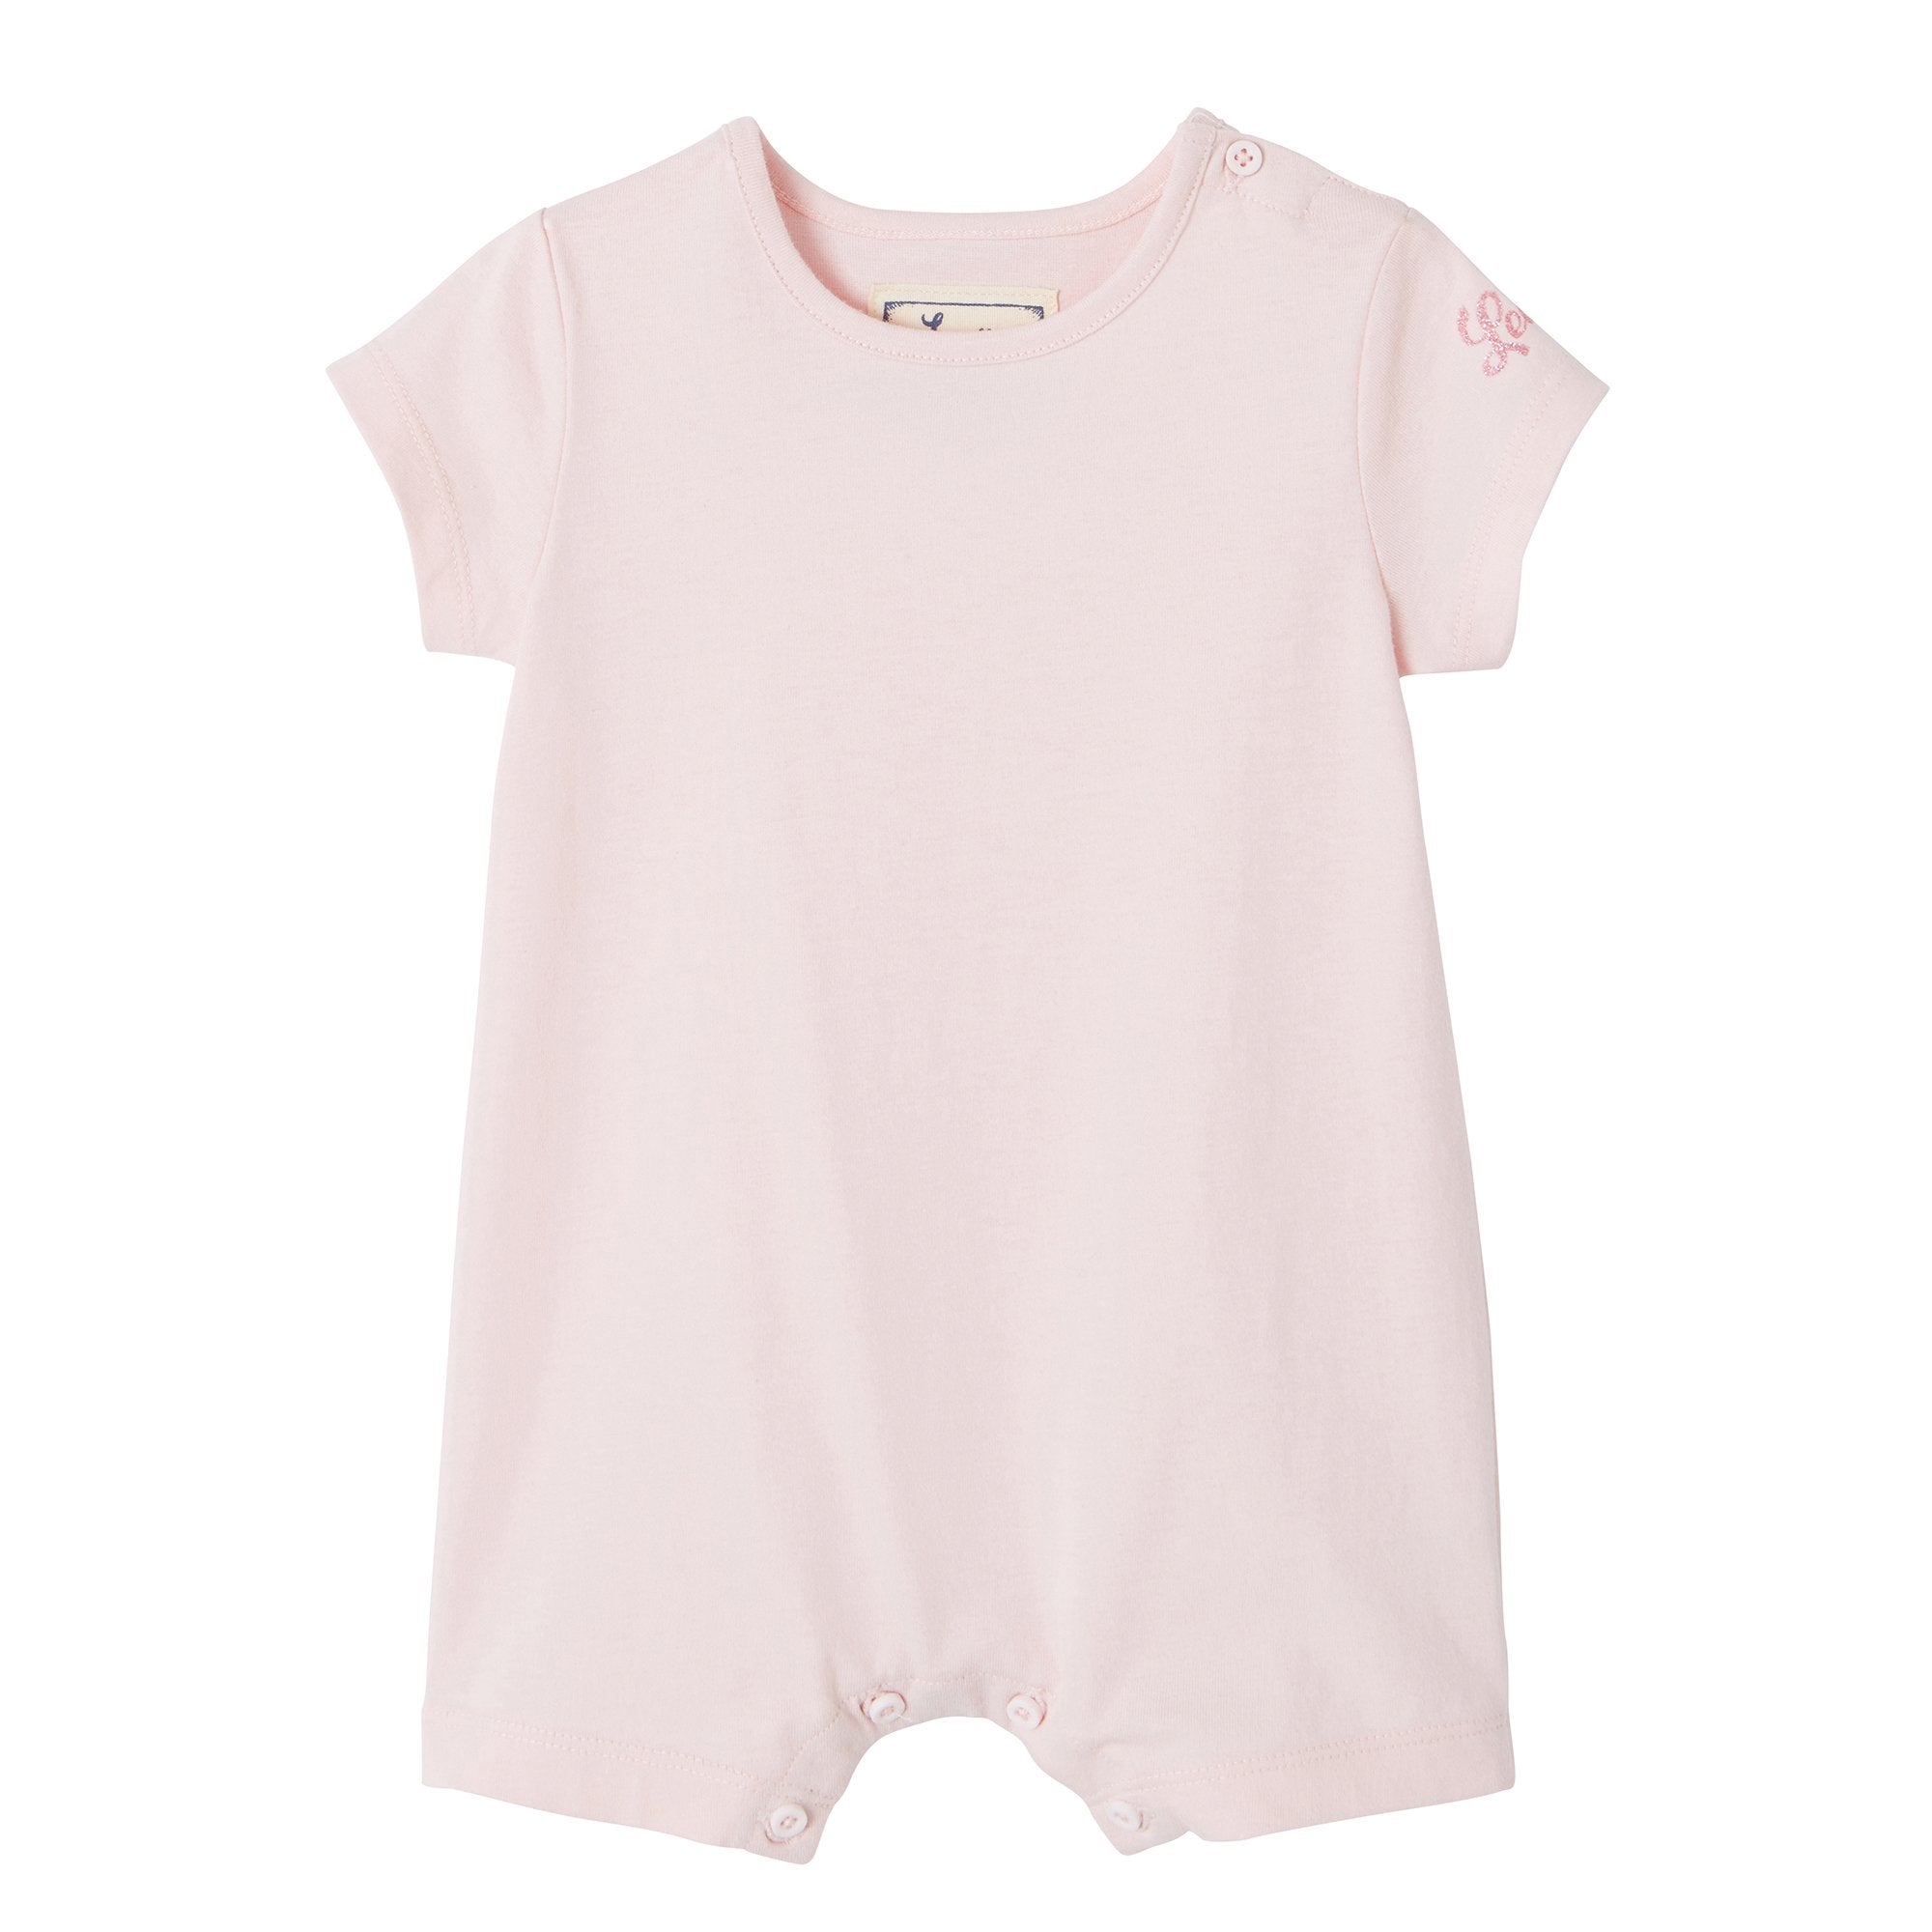 Levi's Girls Two Piece Gift Set | Bababoom Baby Boutique